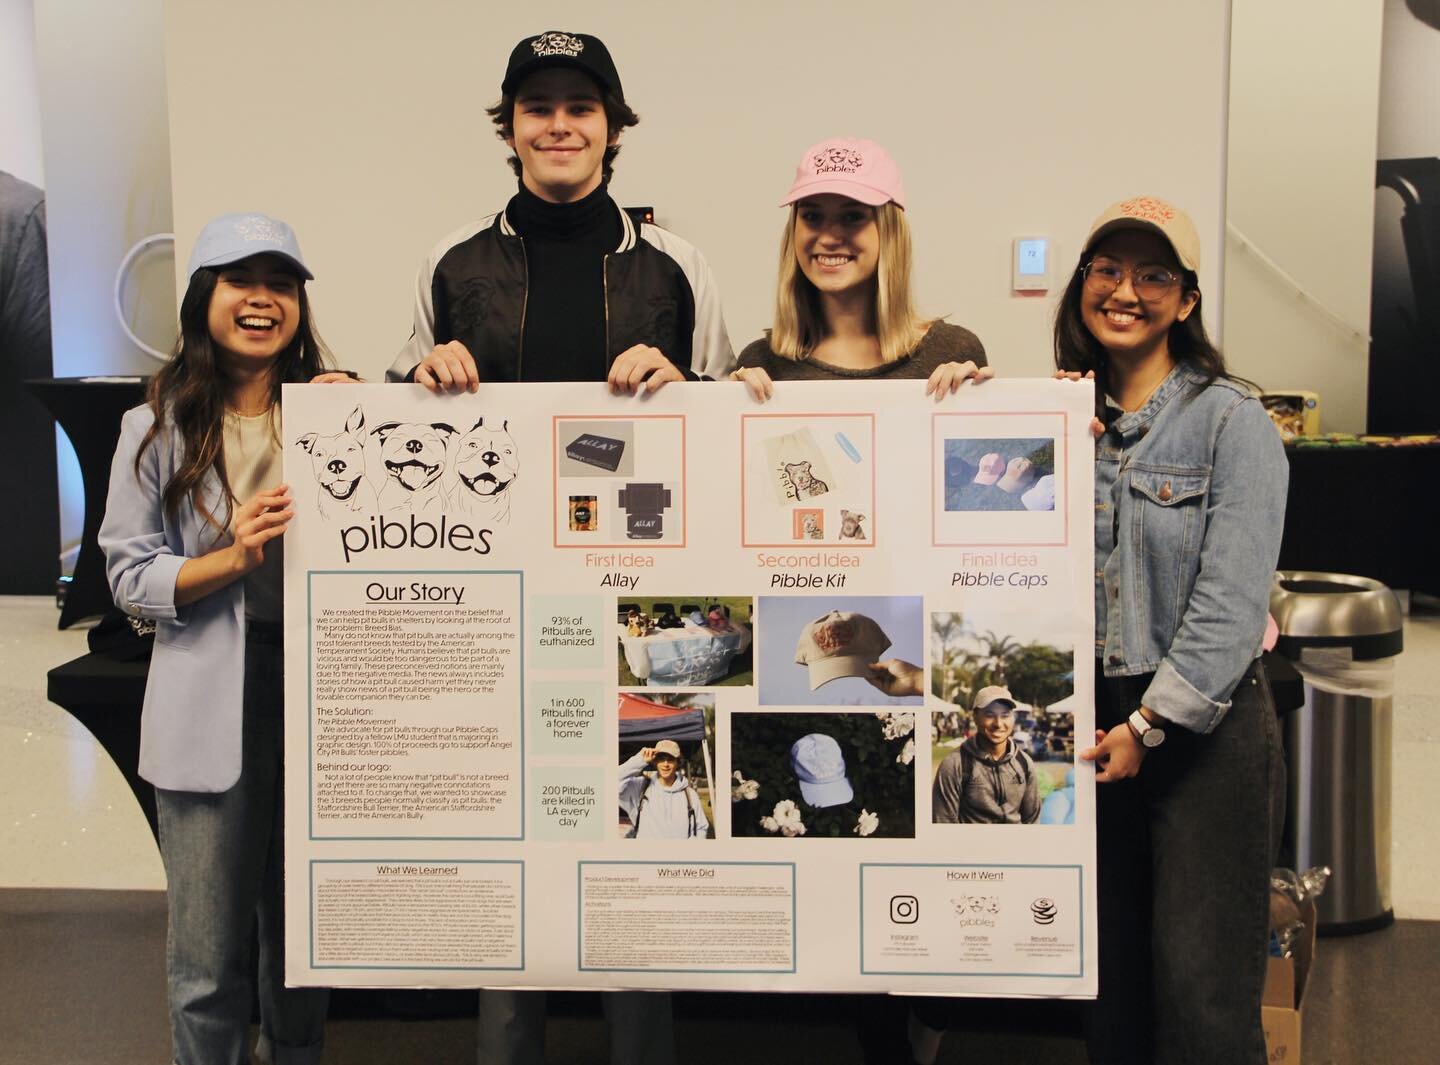 The team that made this all happen 😍 Thank you to everyone who came out to support Pibbles yesterday!
&bull;
Although it is the end of the semester, we are still selling Pibble caps online through our website 🤩 Hurry while supplies last! Link in bi